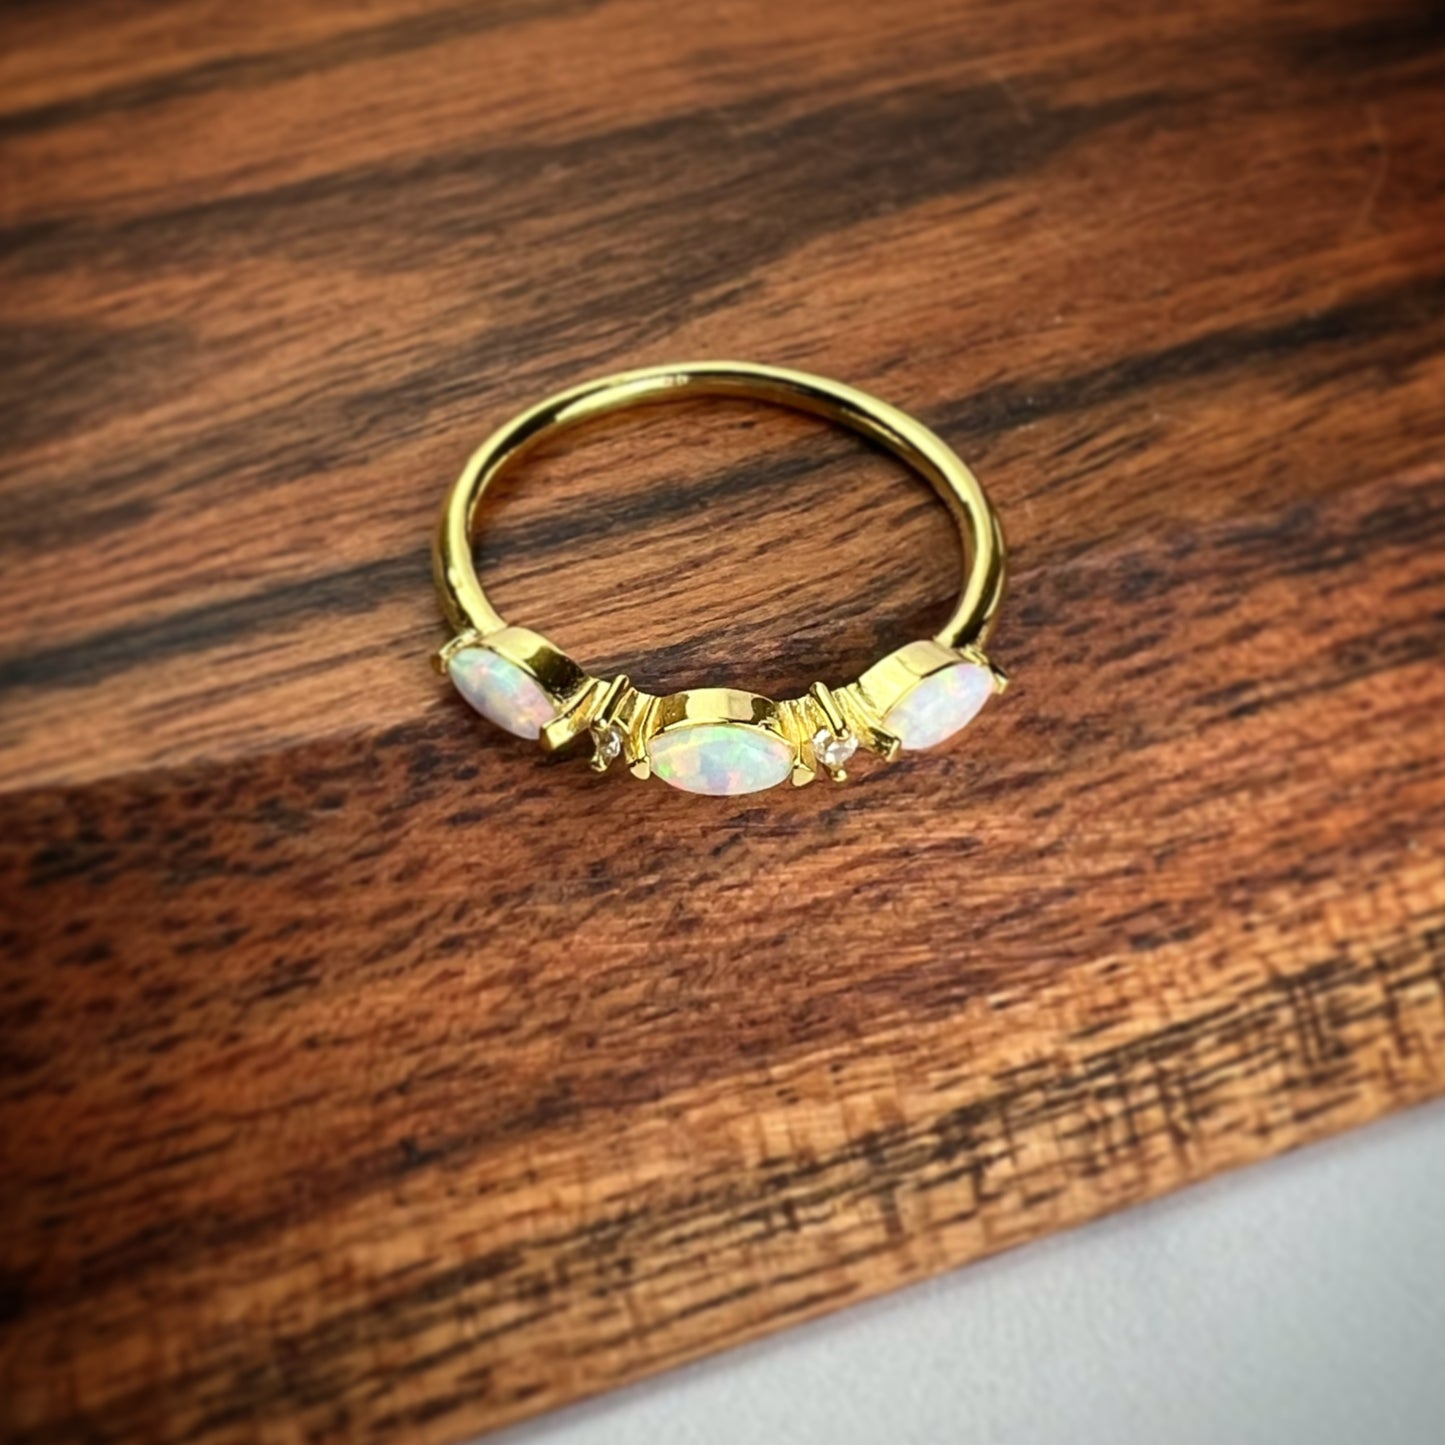 Gold-Plated Opal Ring with Ashes or Breast Milk Infused | Cubic Zirconia Accents | Unique Memorial Jewelry